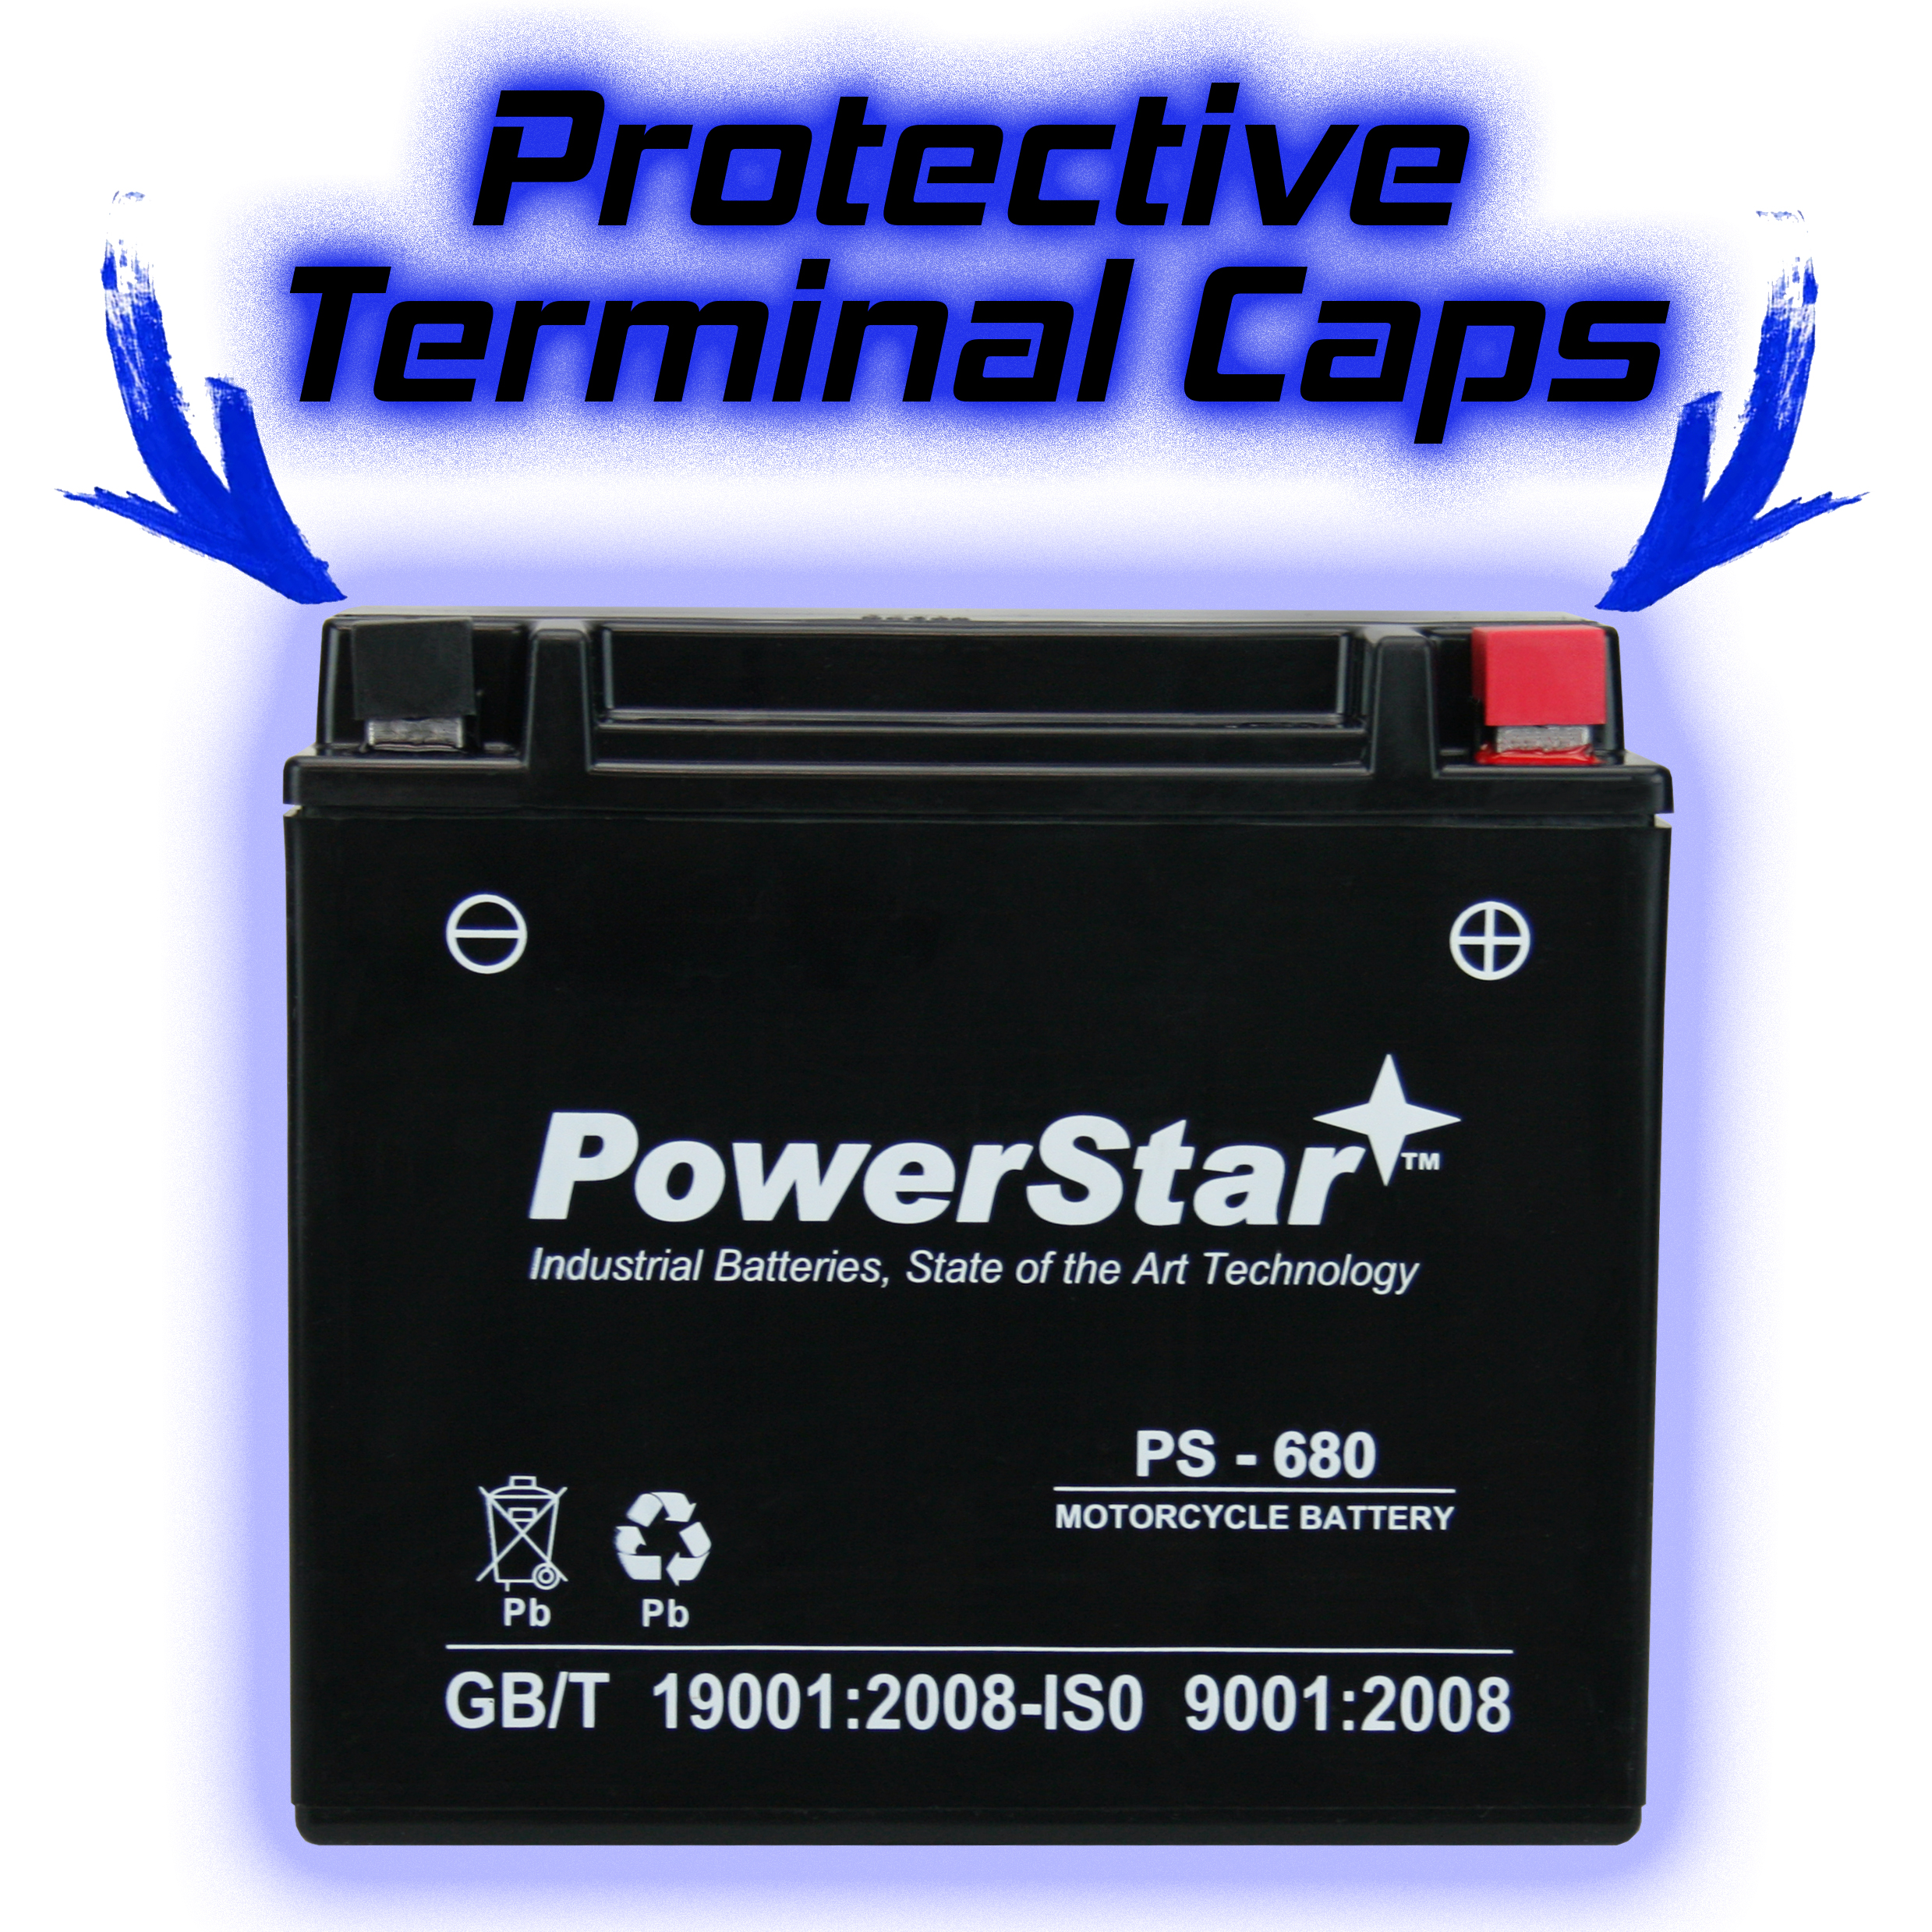 PowerStar PS-680 Motorsports Battery Compatible with HondaGL18000 Gold Wing F6B Deluxe 2013 to 2017